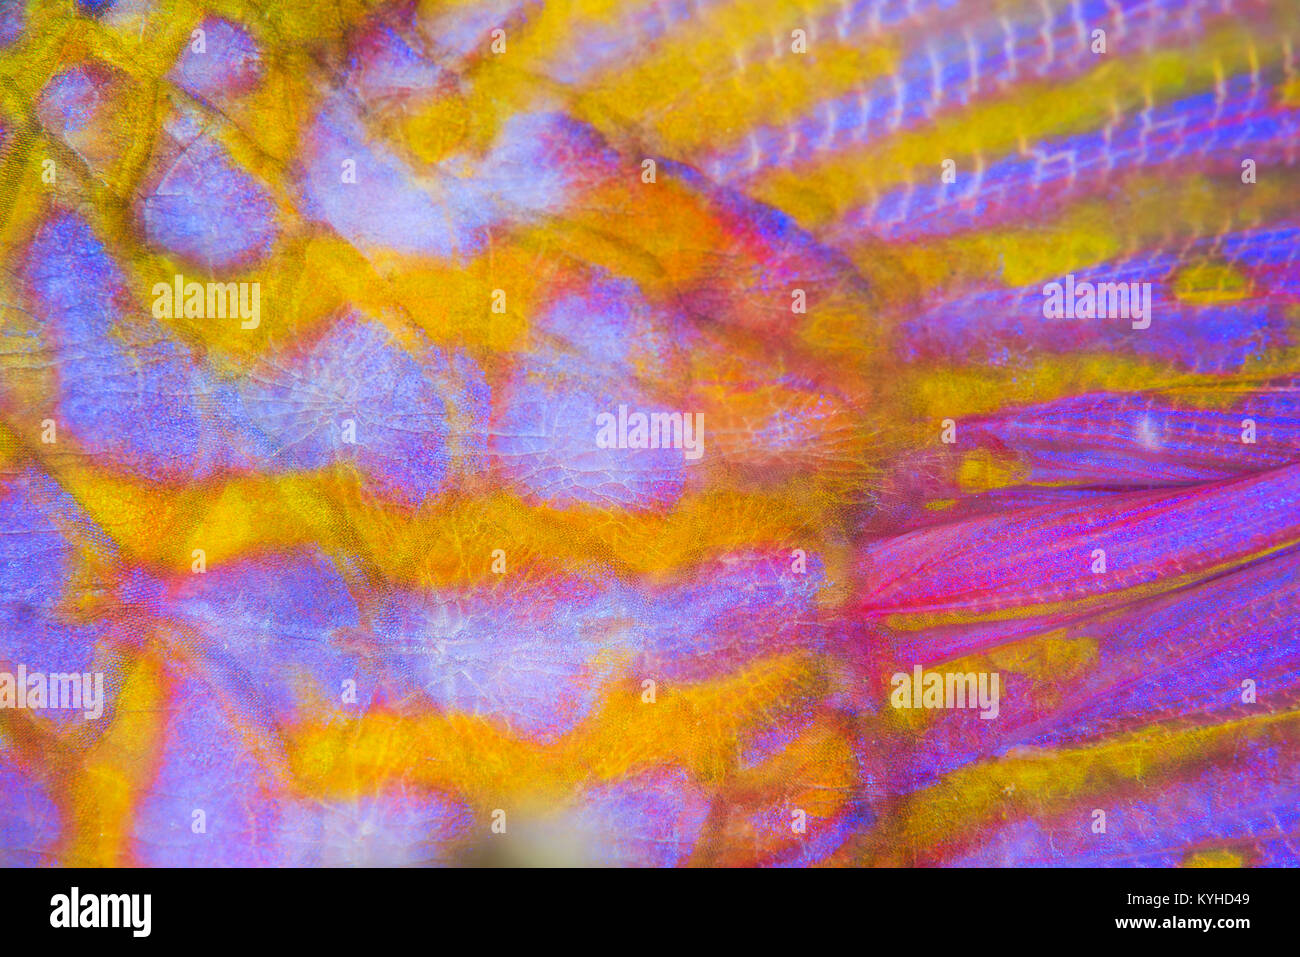 Abstract colourful scales, body, peduncle, and caudal fin of a Many-bar Goatfish in Horseshoe Bay, Rinca Island, Komodo National Park, Indonesia. Stock Photo